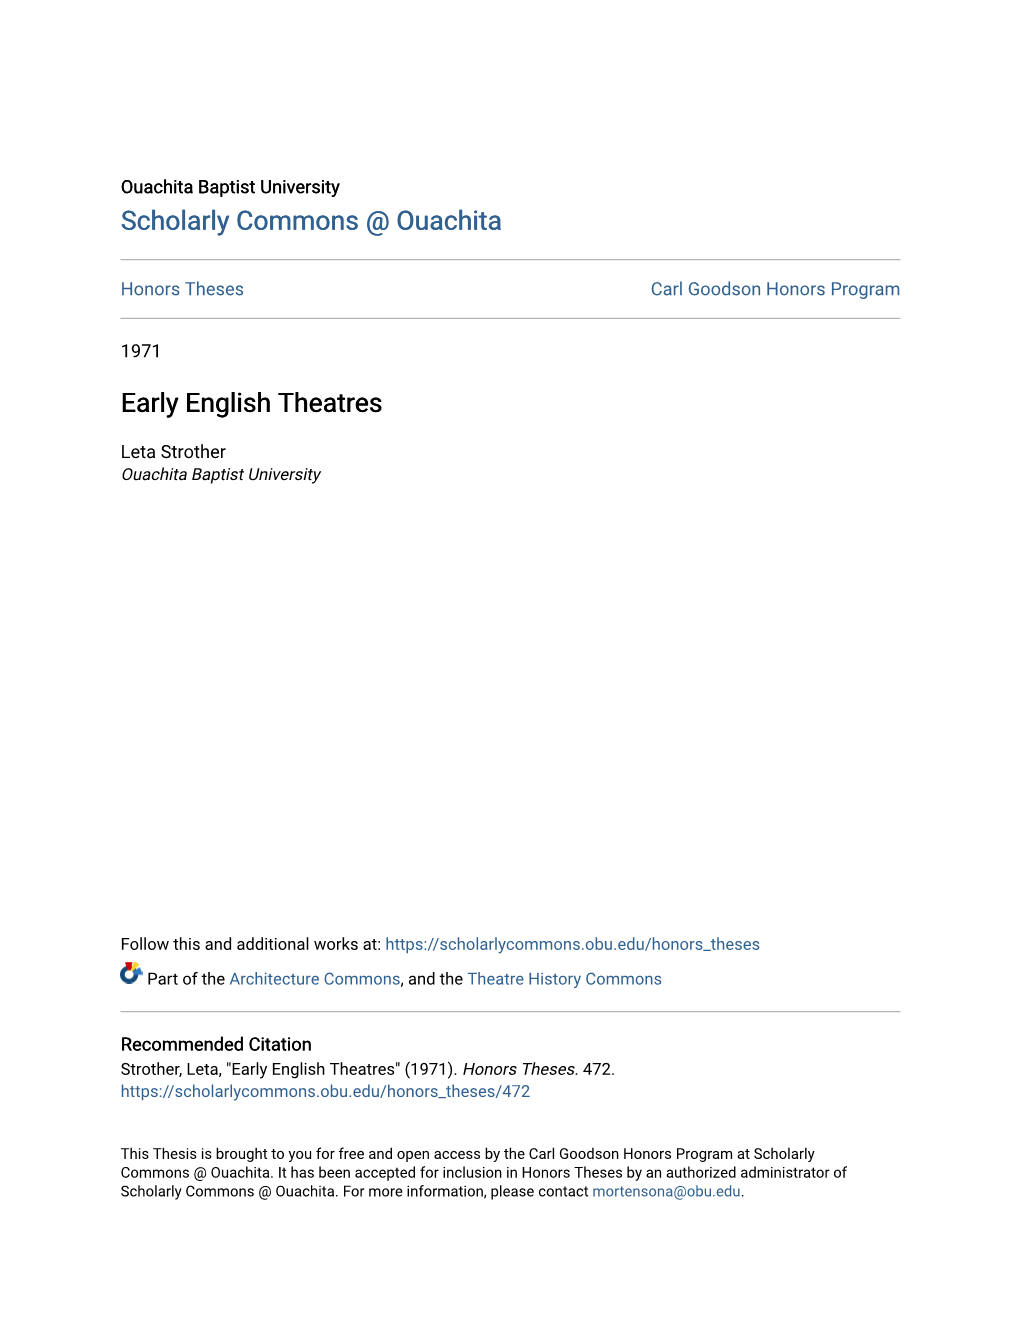 Early English Theatres